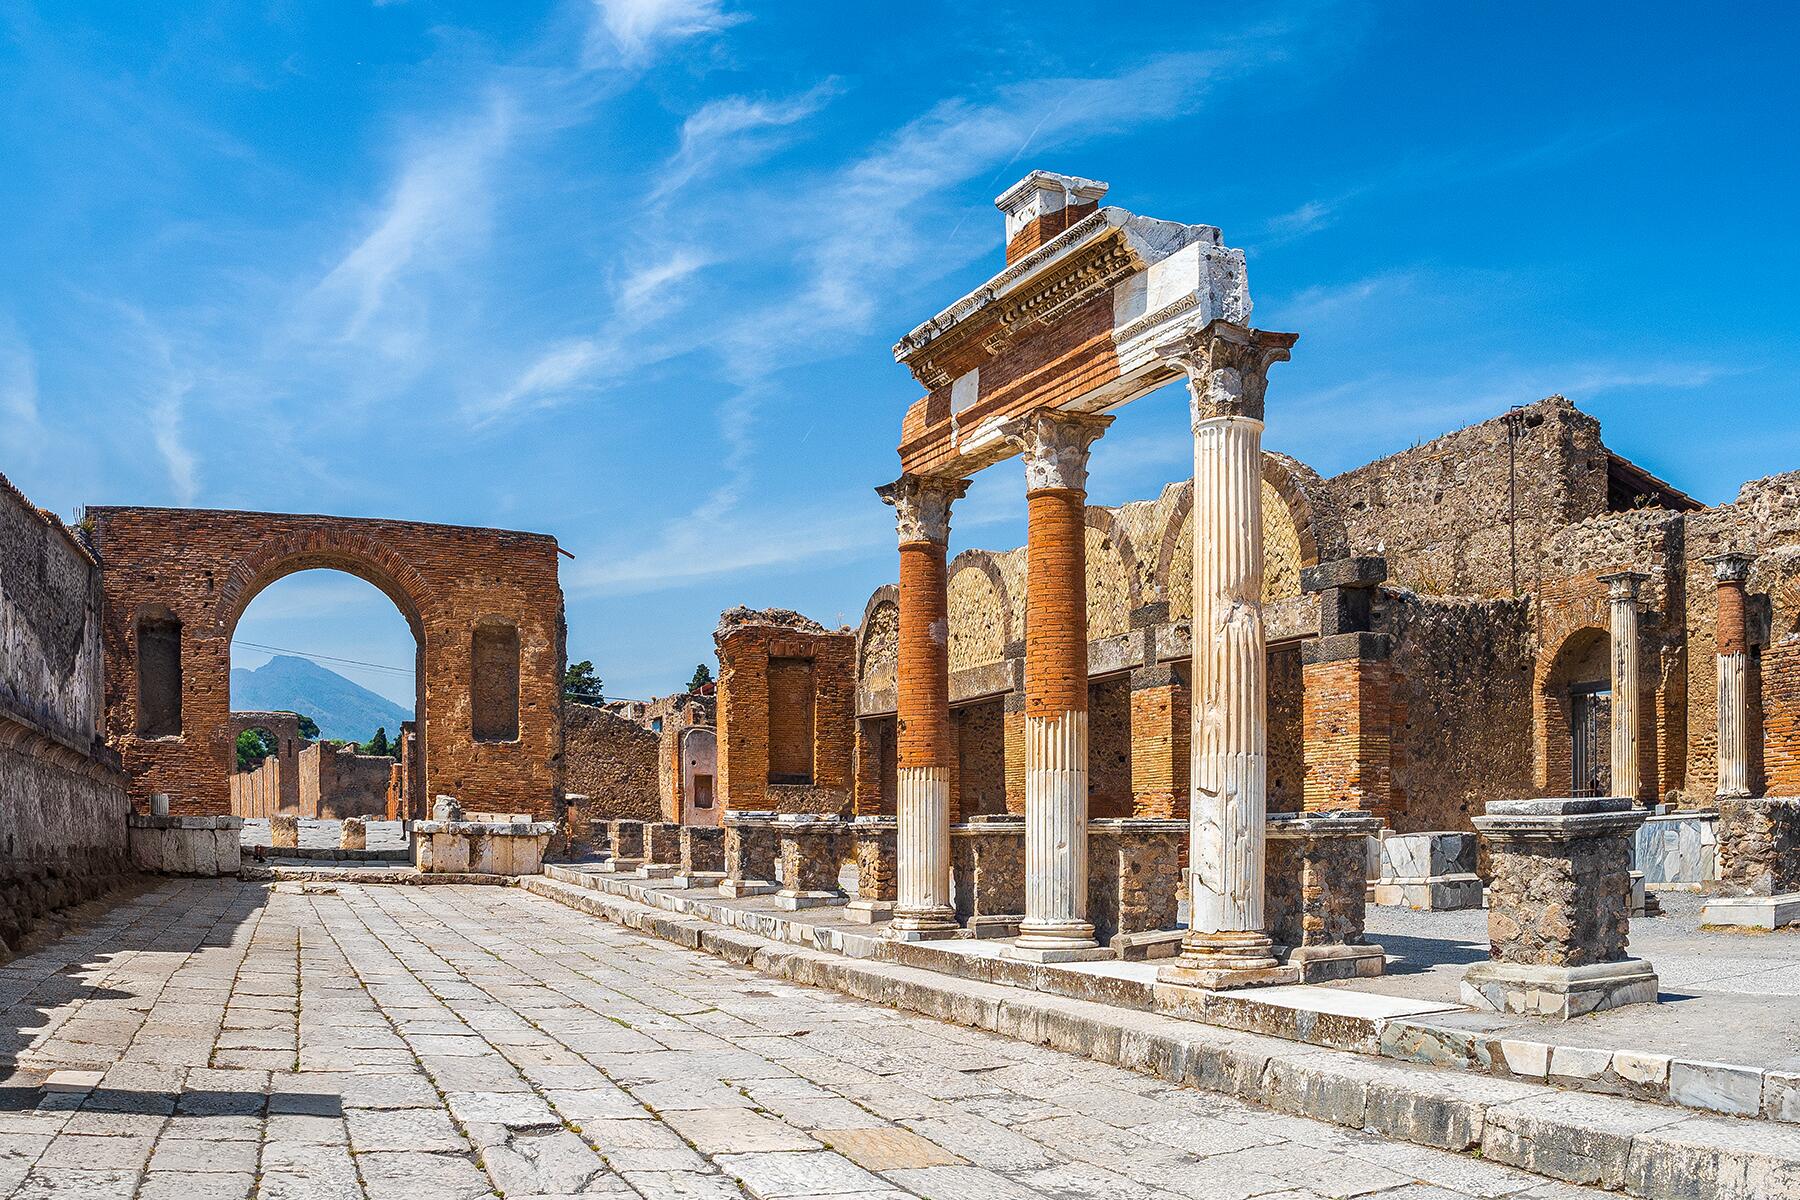 <a href='https://www.fodors.com/world/europe/italy/experiences/news/photos/common-scams-in-italy#'>From &quot;Watch Out for These 10 Common Scams When You’re in Italy This Summer: Pompeii’s “Tourist Office”&quot;</a>